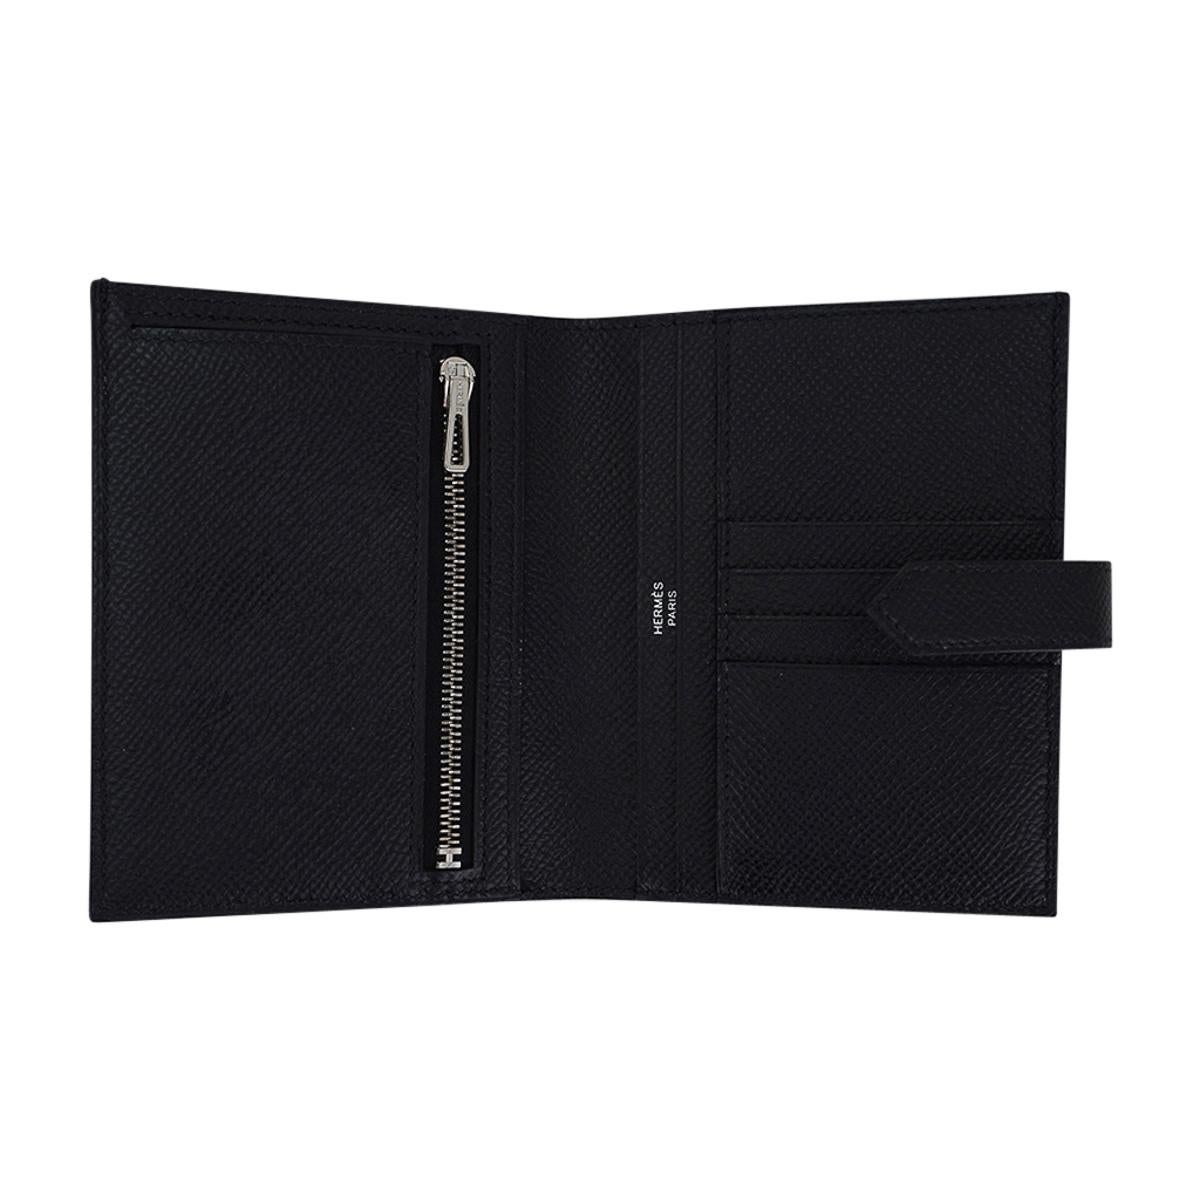 Mightychic offers an Hermes Bearn Compact wallet featured in classic Black.
Beautifully accentuated in Epsom leather and Palladium hardware.
4 credit card slots and 4 pockets.
1 bill pocket.
Zip change purse.
New or Pristine Store Fresh